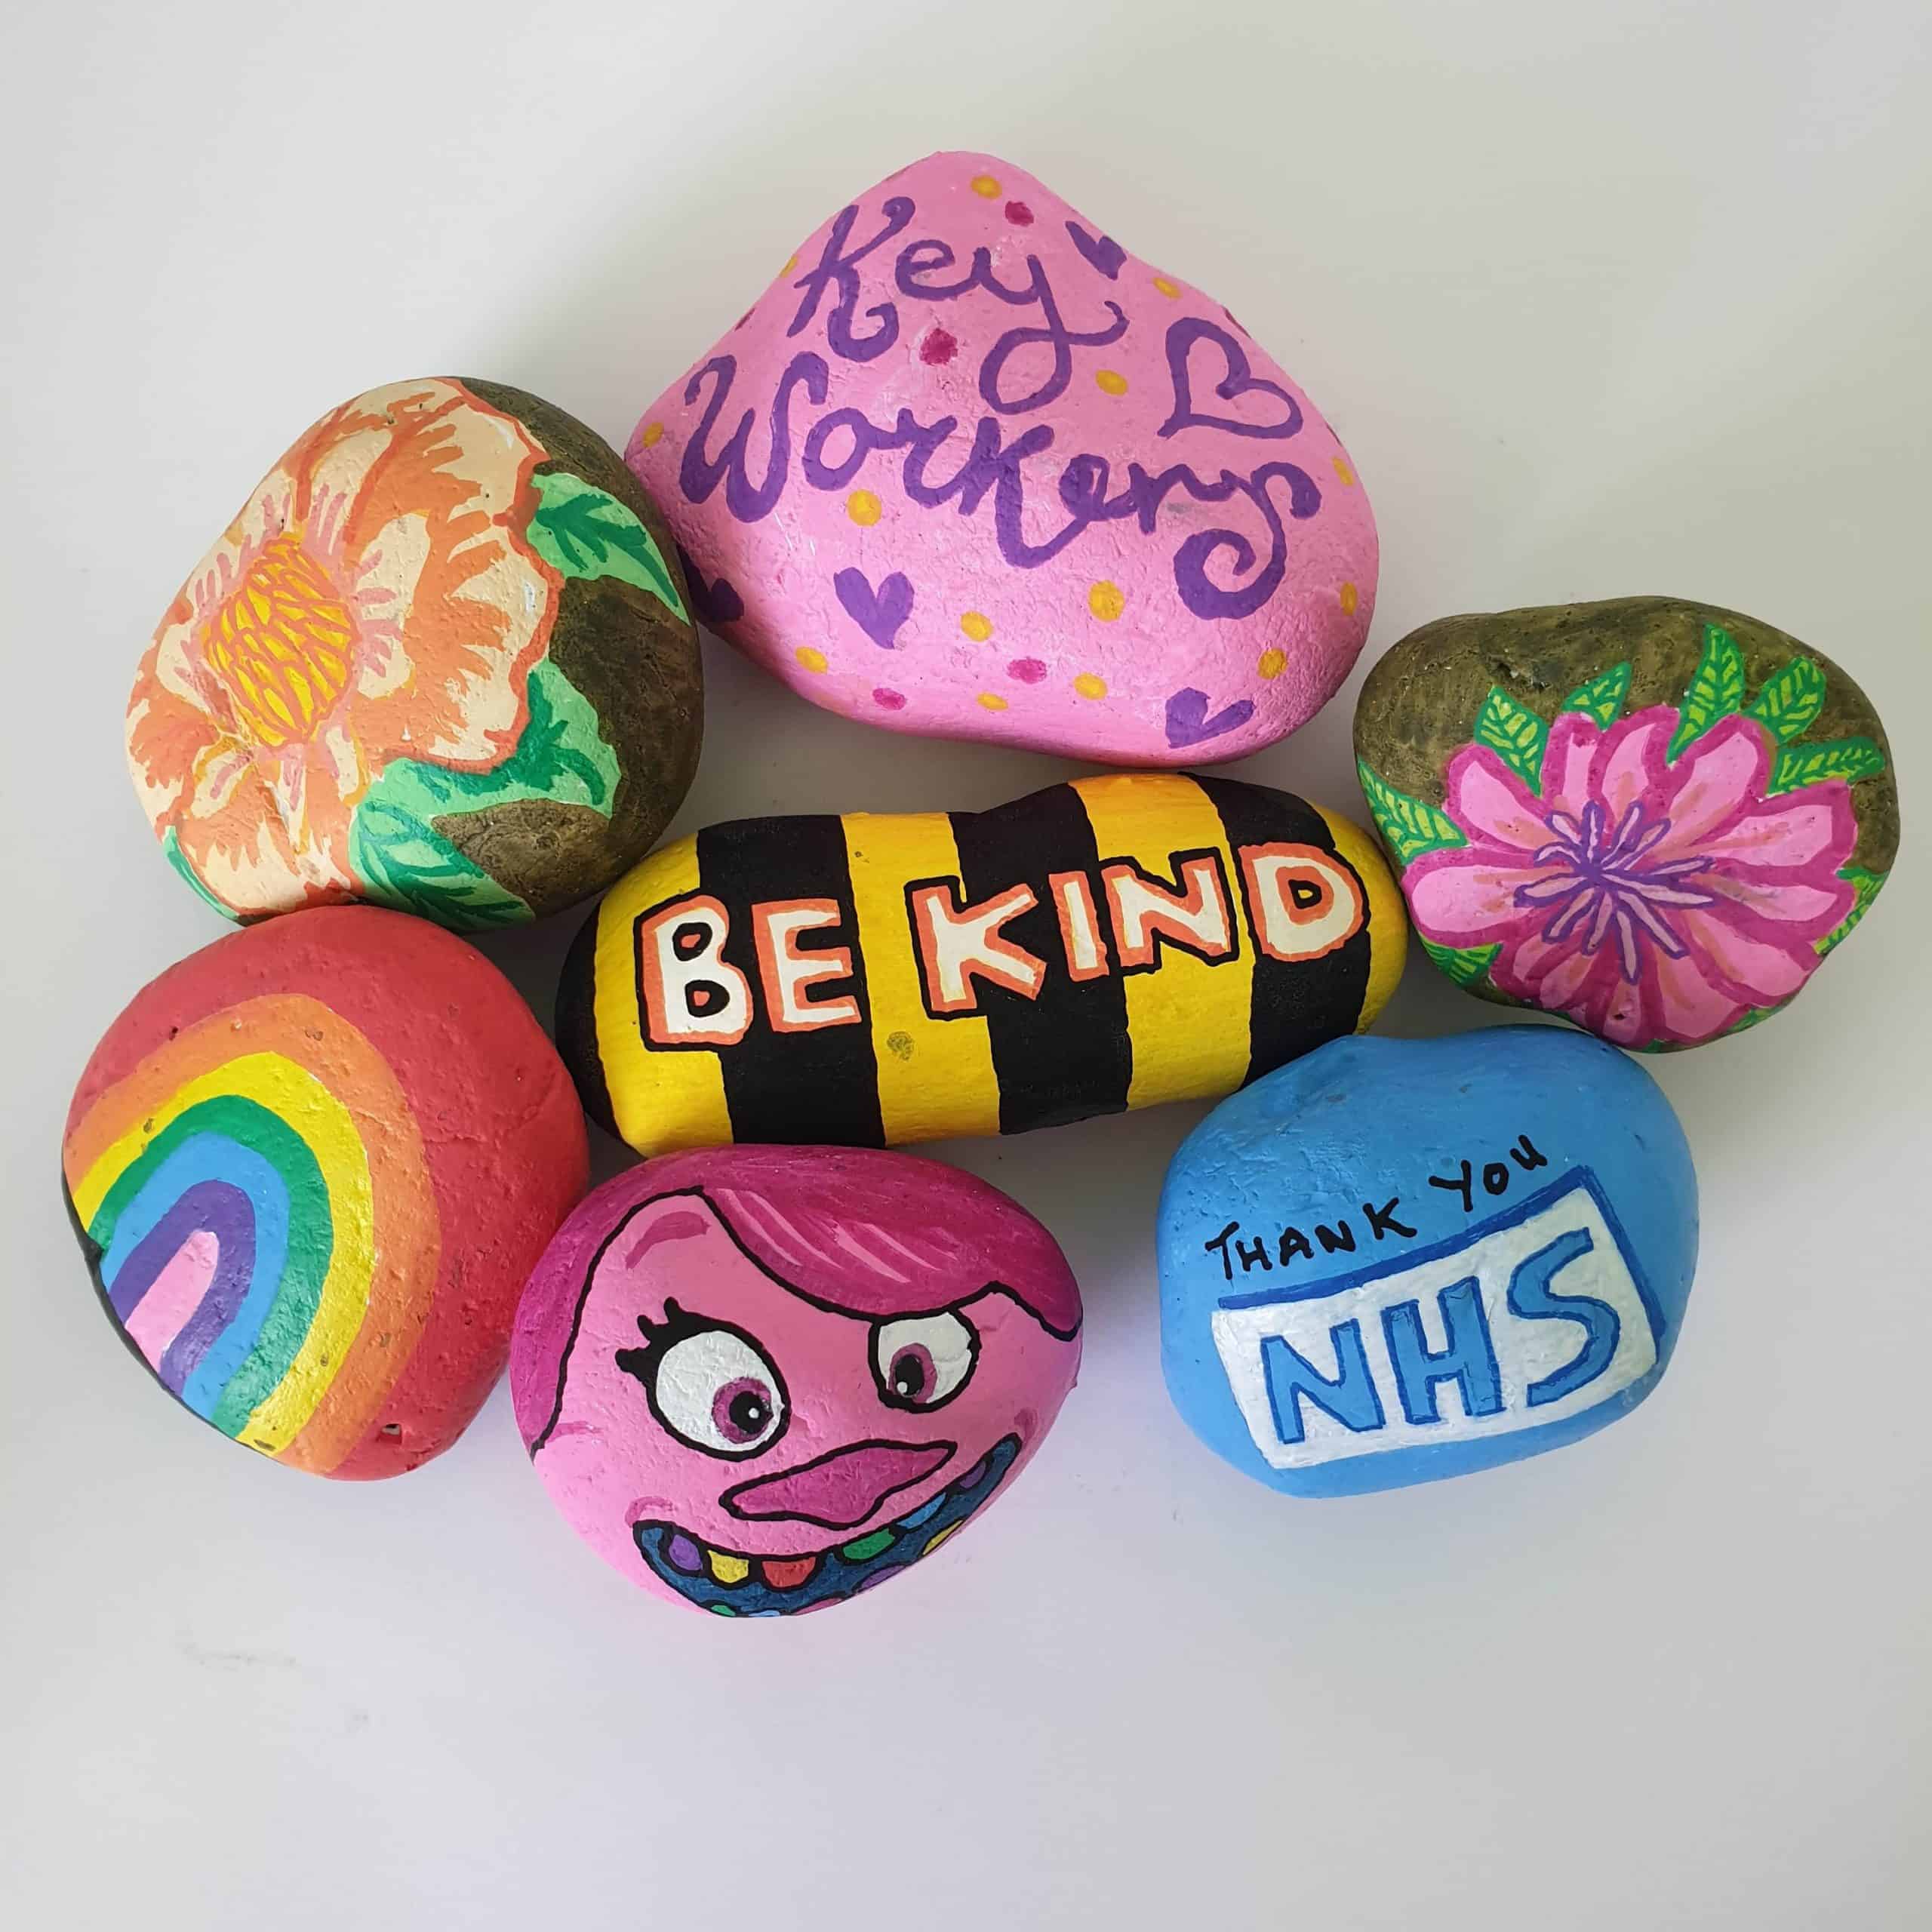 5 best rock painting supplies you need to get started  Rock painting  supplies, Painted rocks diy, Painted rocks